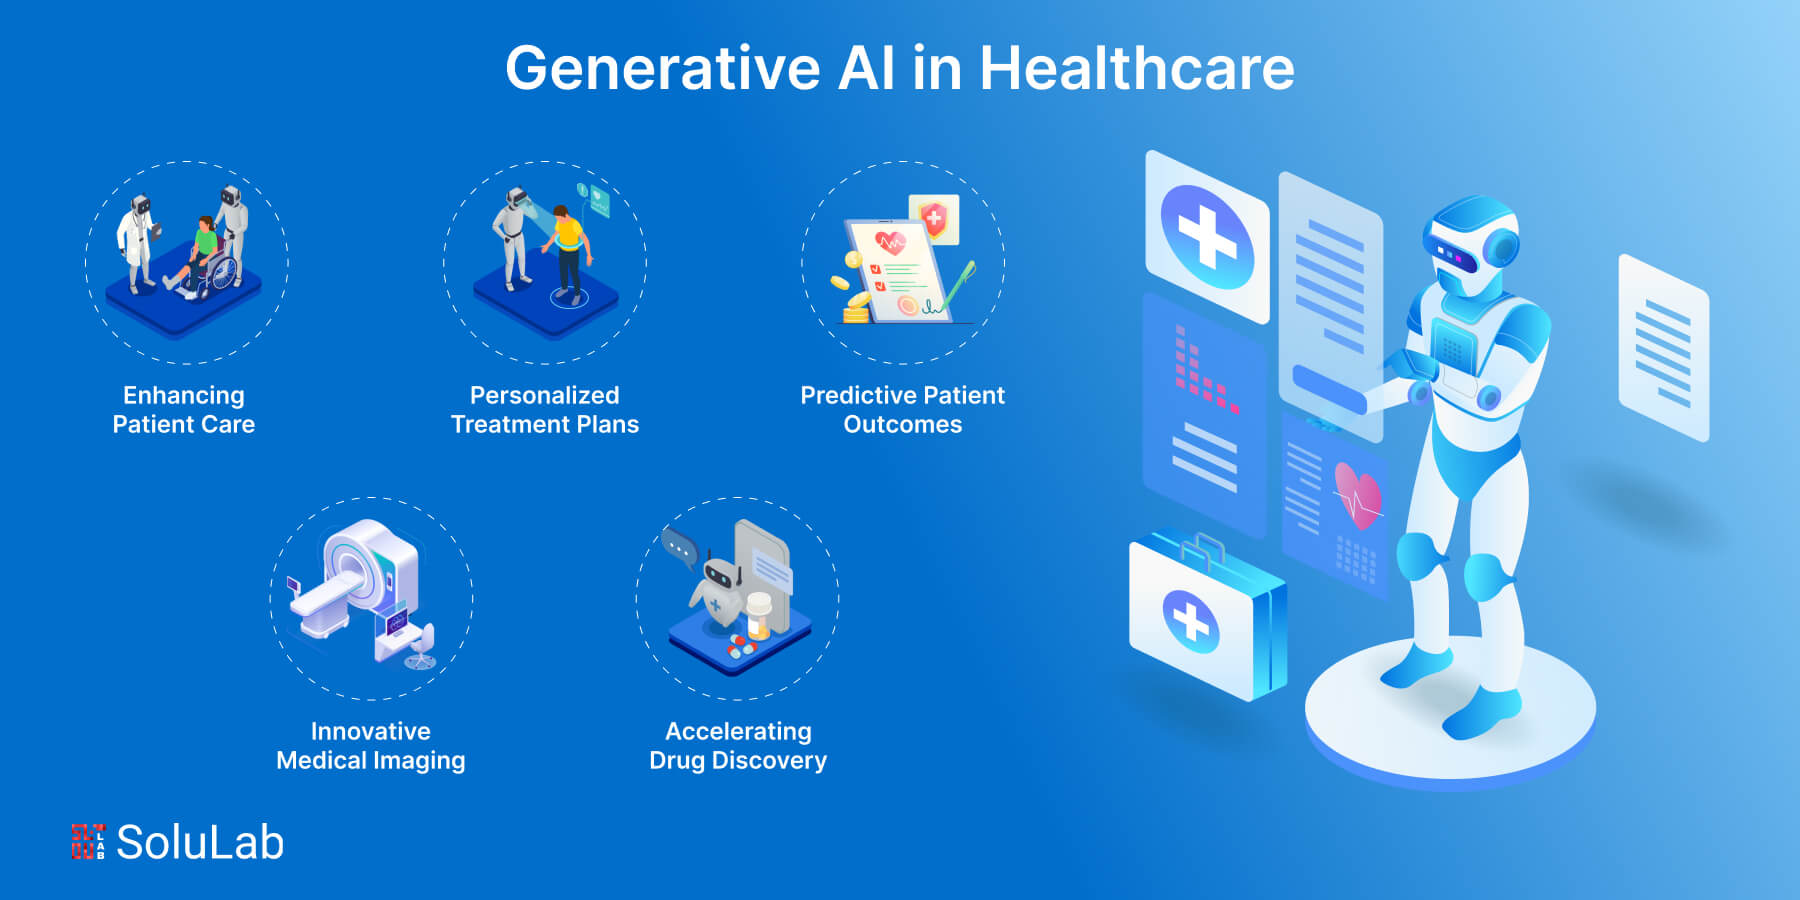 Generative AI in Healthcare: Use Cases & Benefits